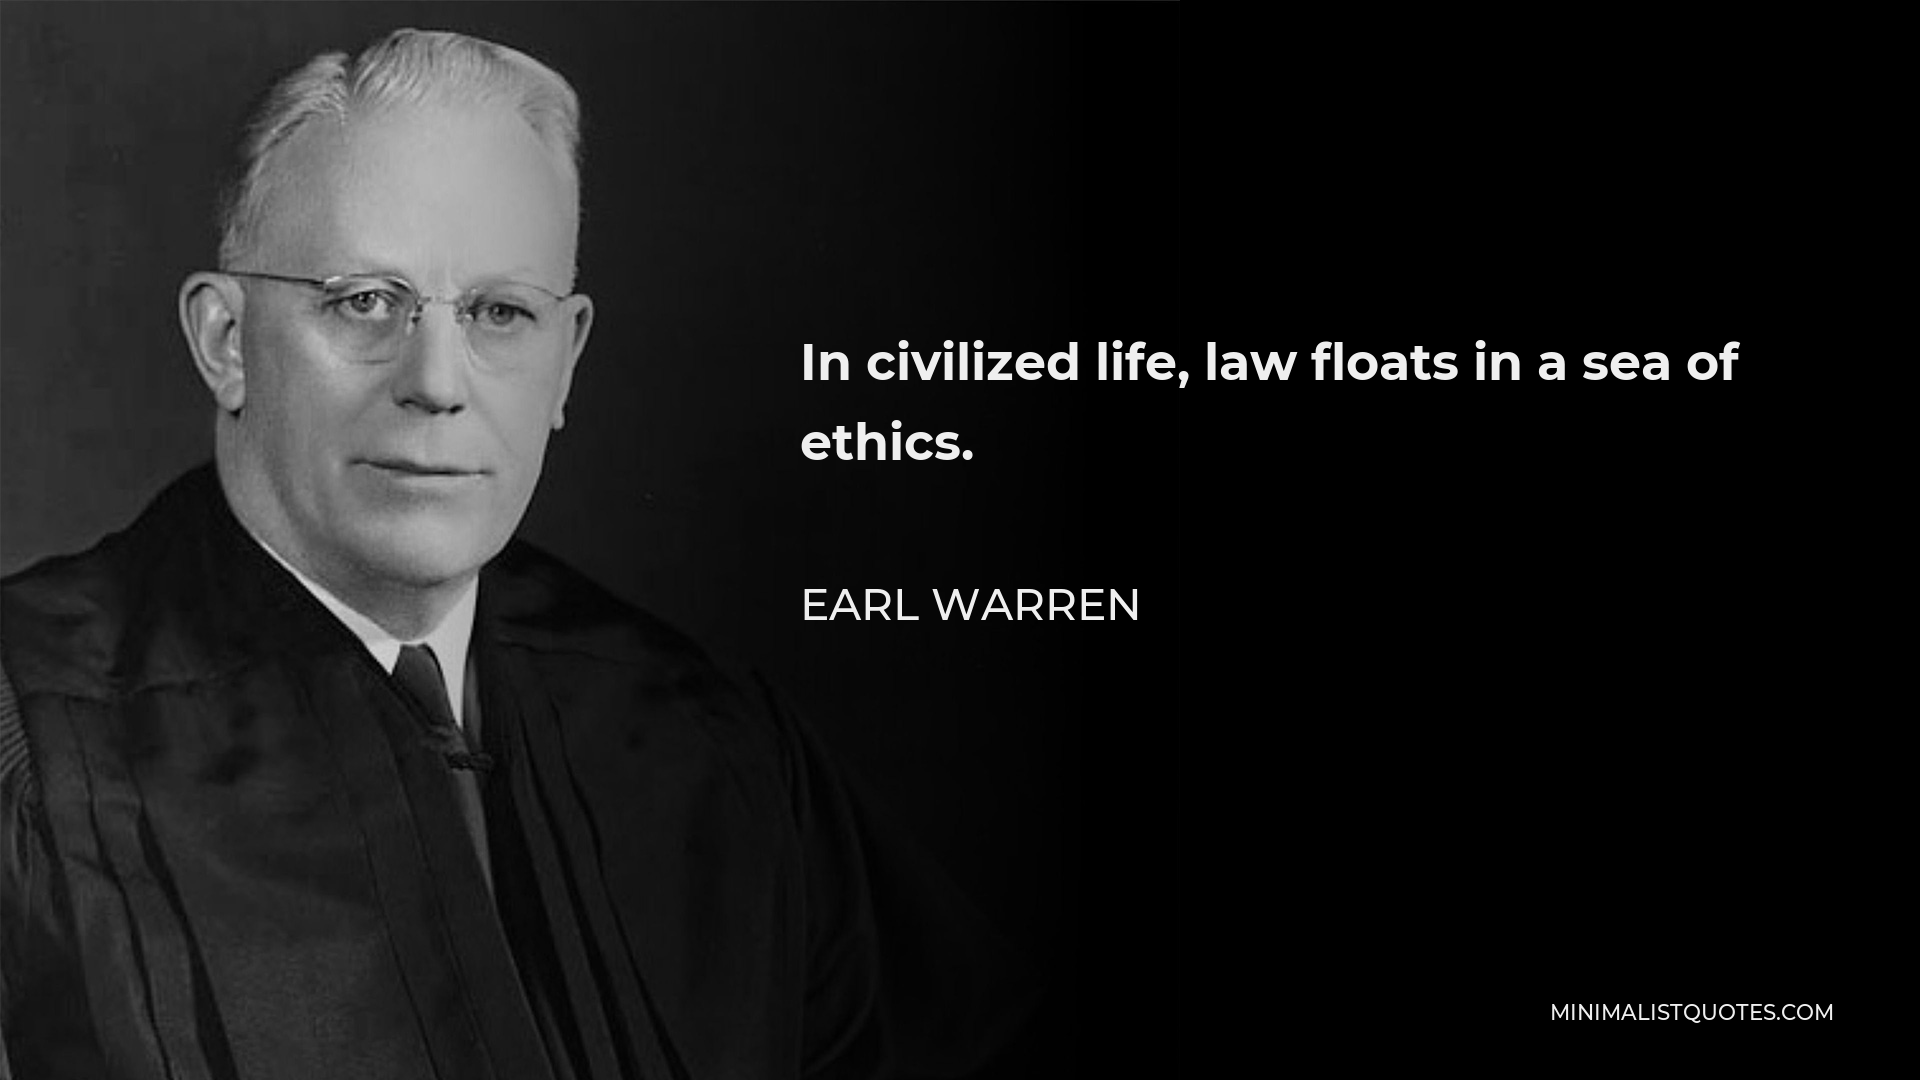 Earl Warren Quote - In civilized life, law floats in a sea of ethics.